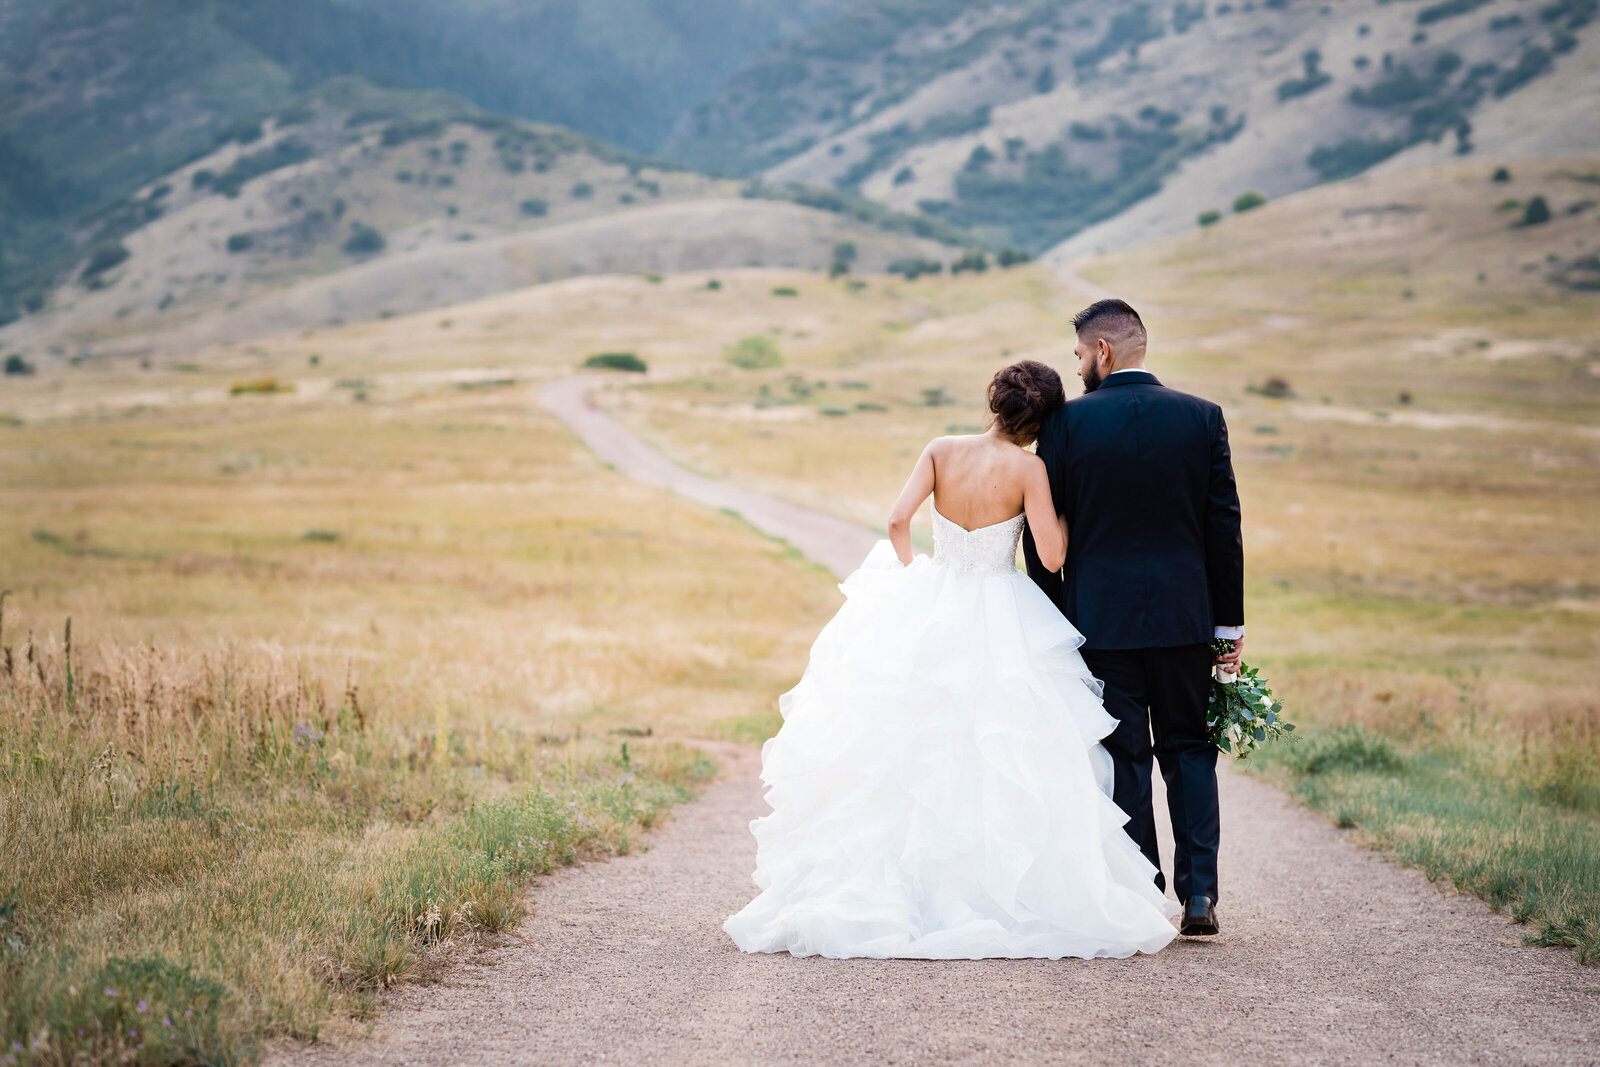 Bride and Groom walking together towards mountains